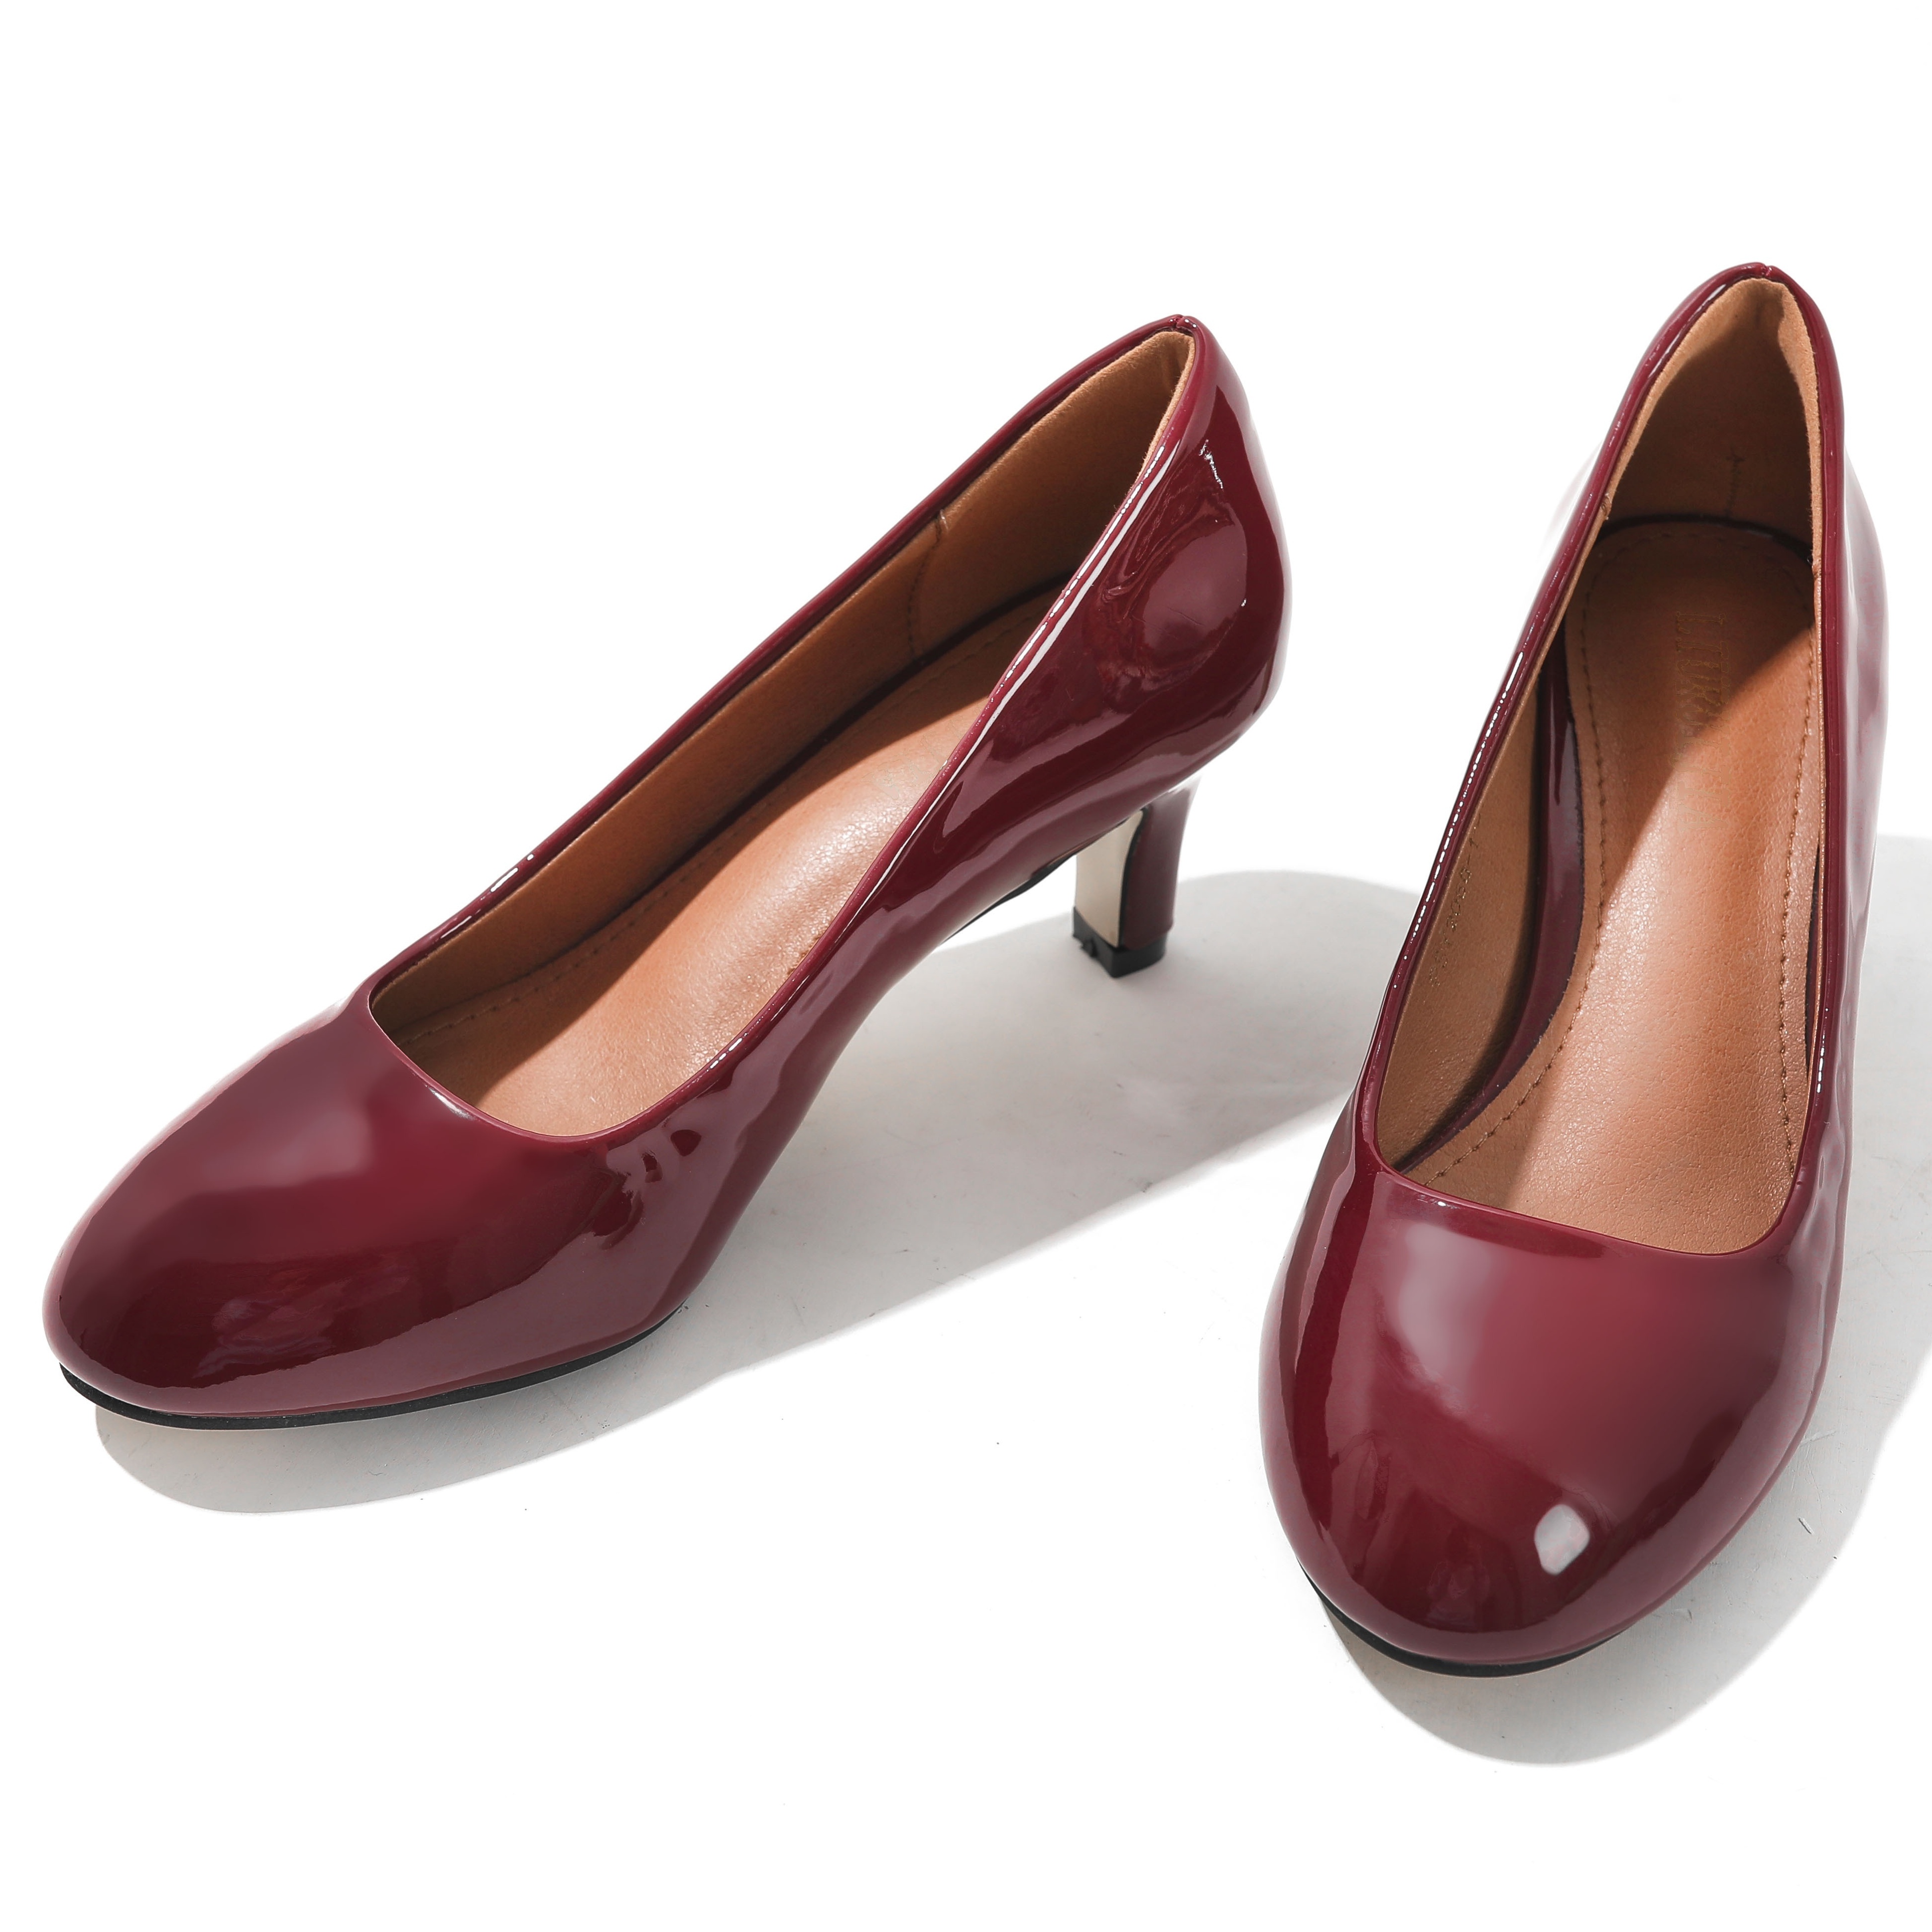 Patent Leather - How It's So Shiny, Waterproof, & Versatile